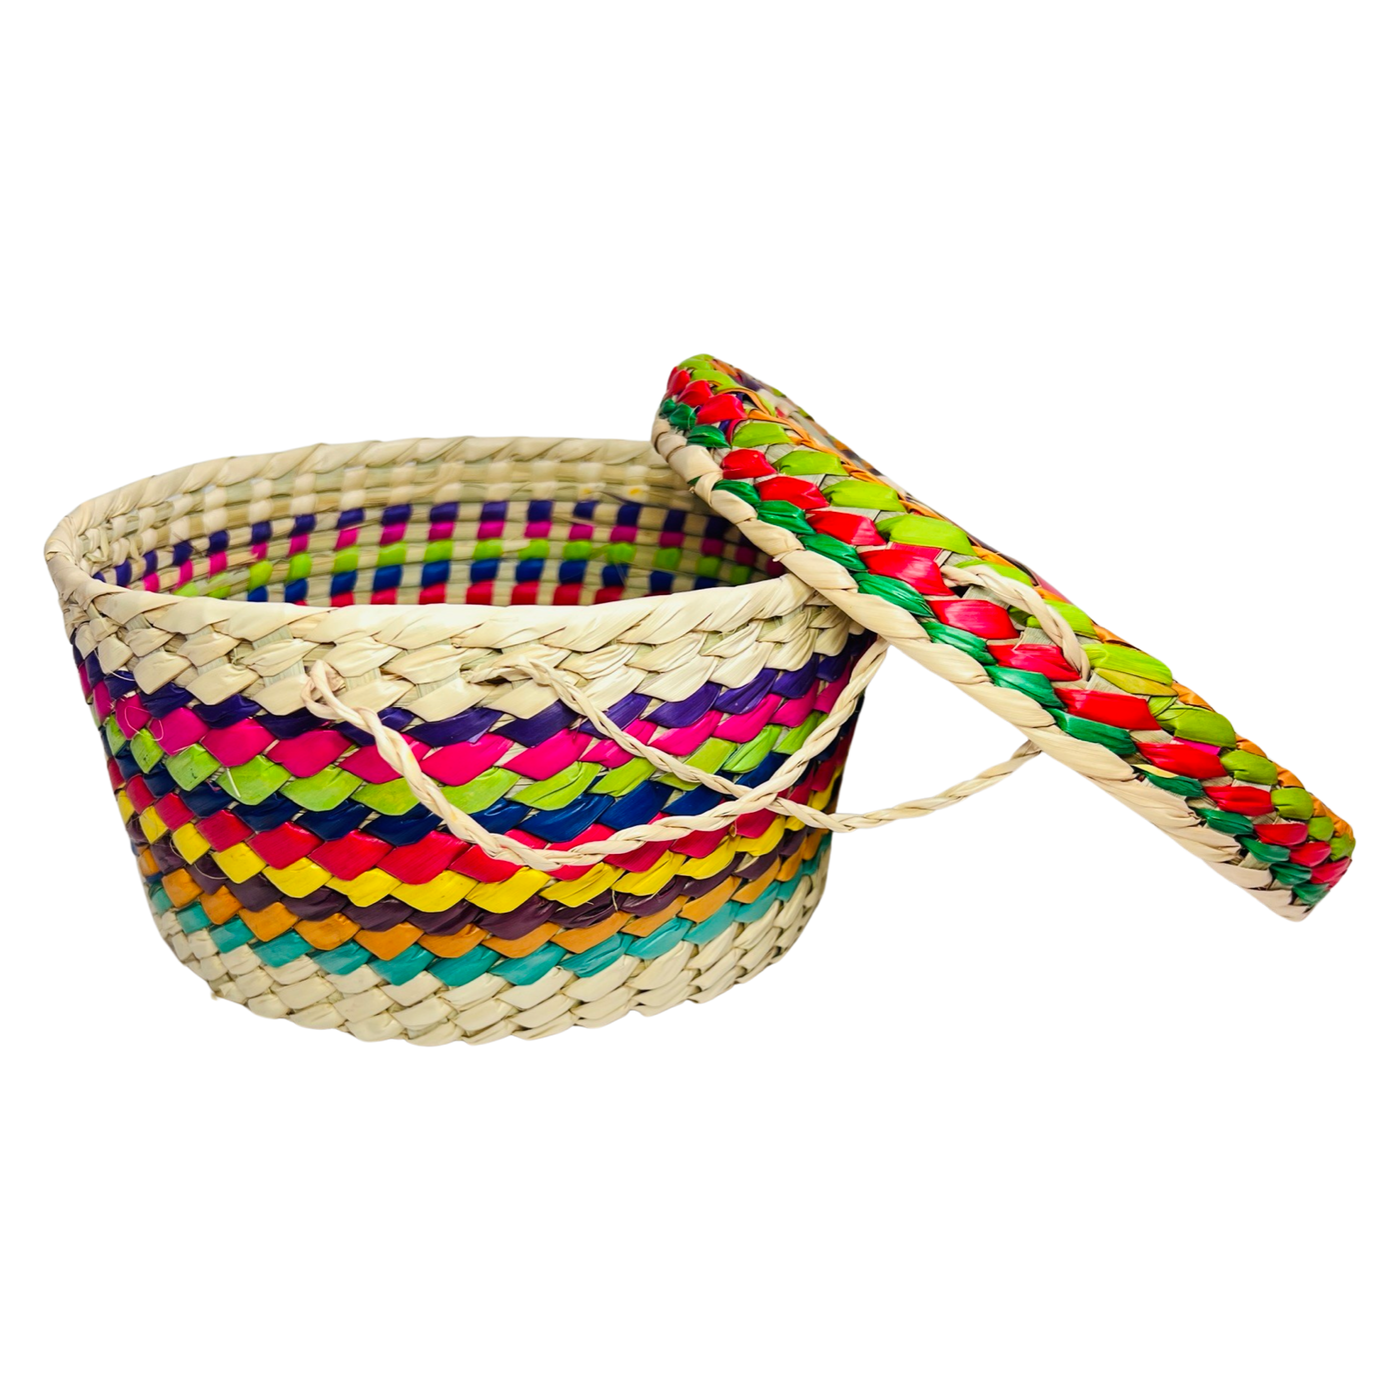 side view of a colorful Mexican woven palm tortillero with the lid open and on the side of the basket